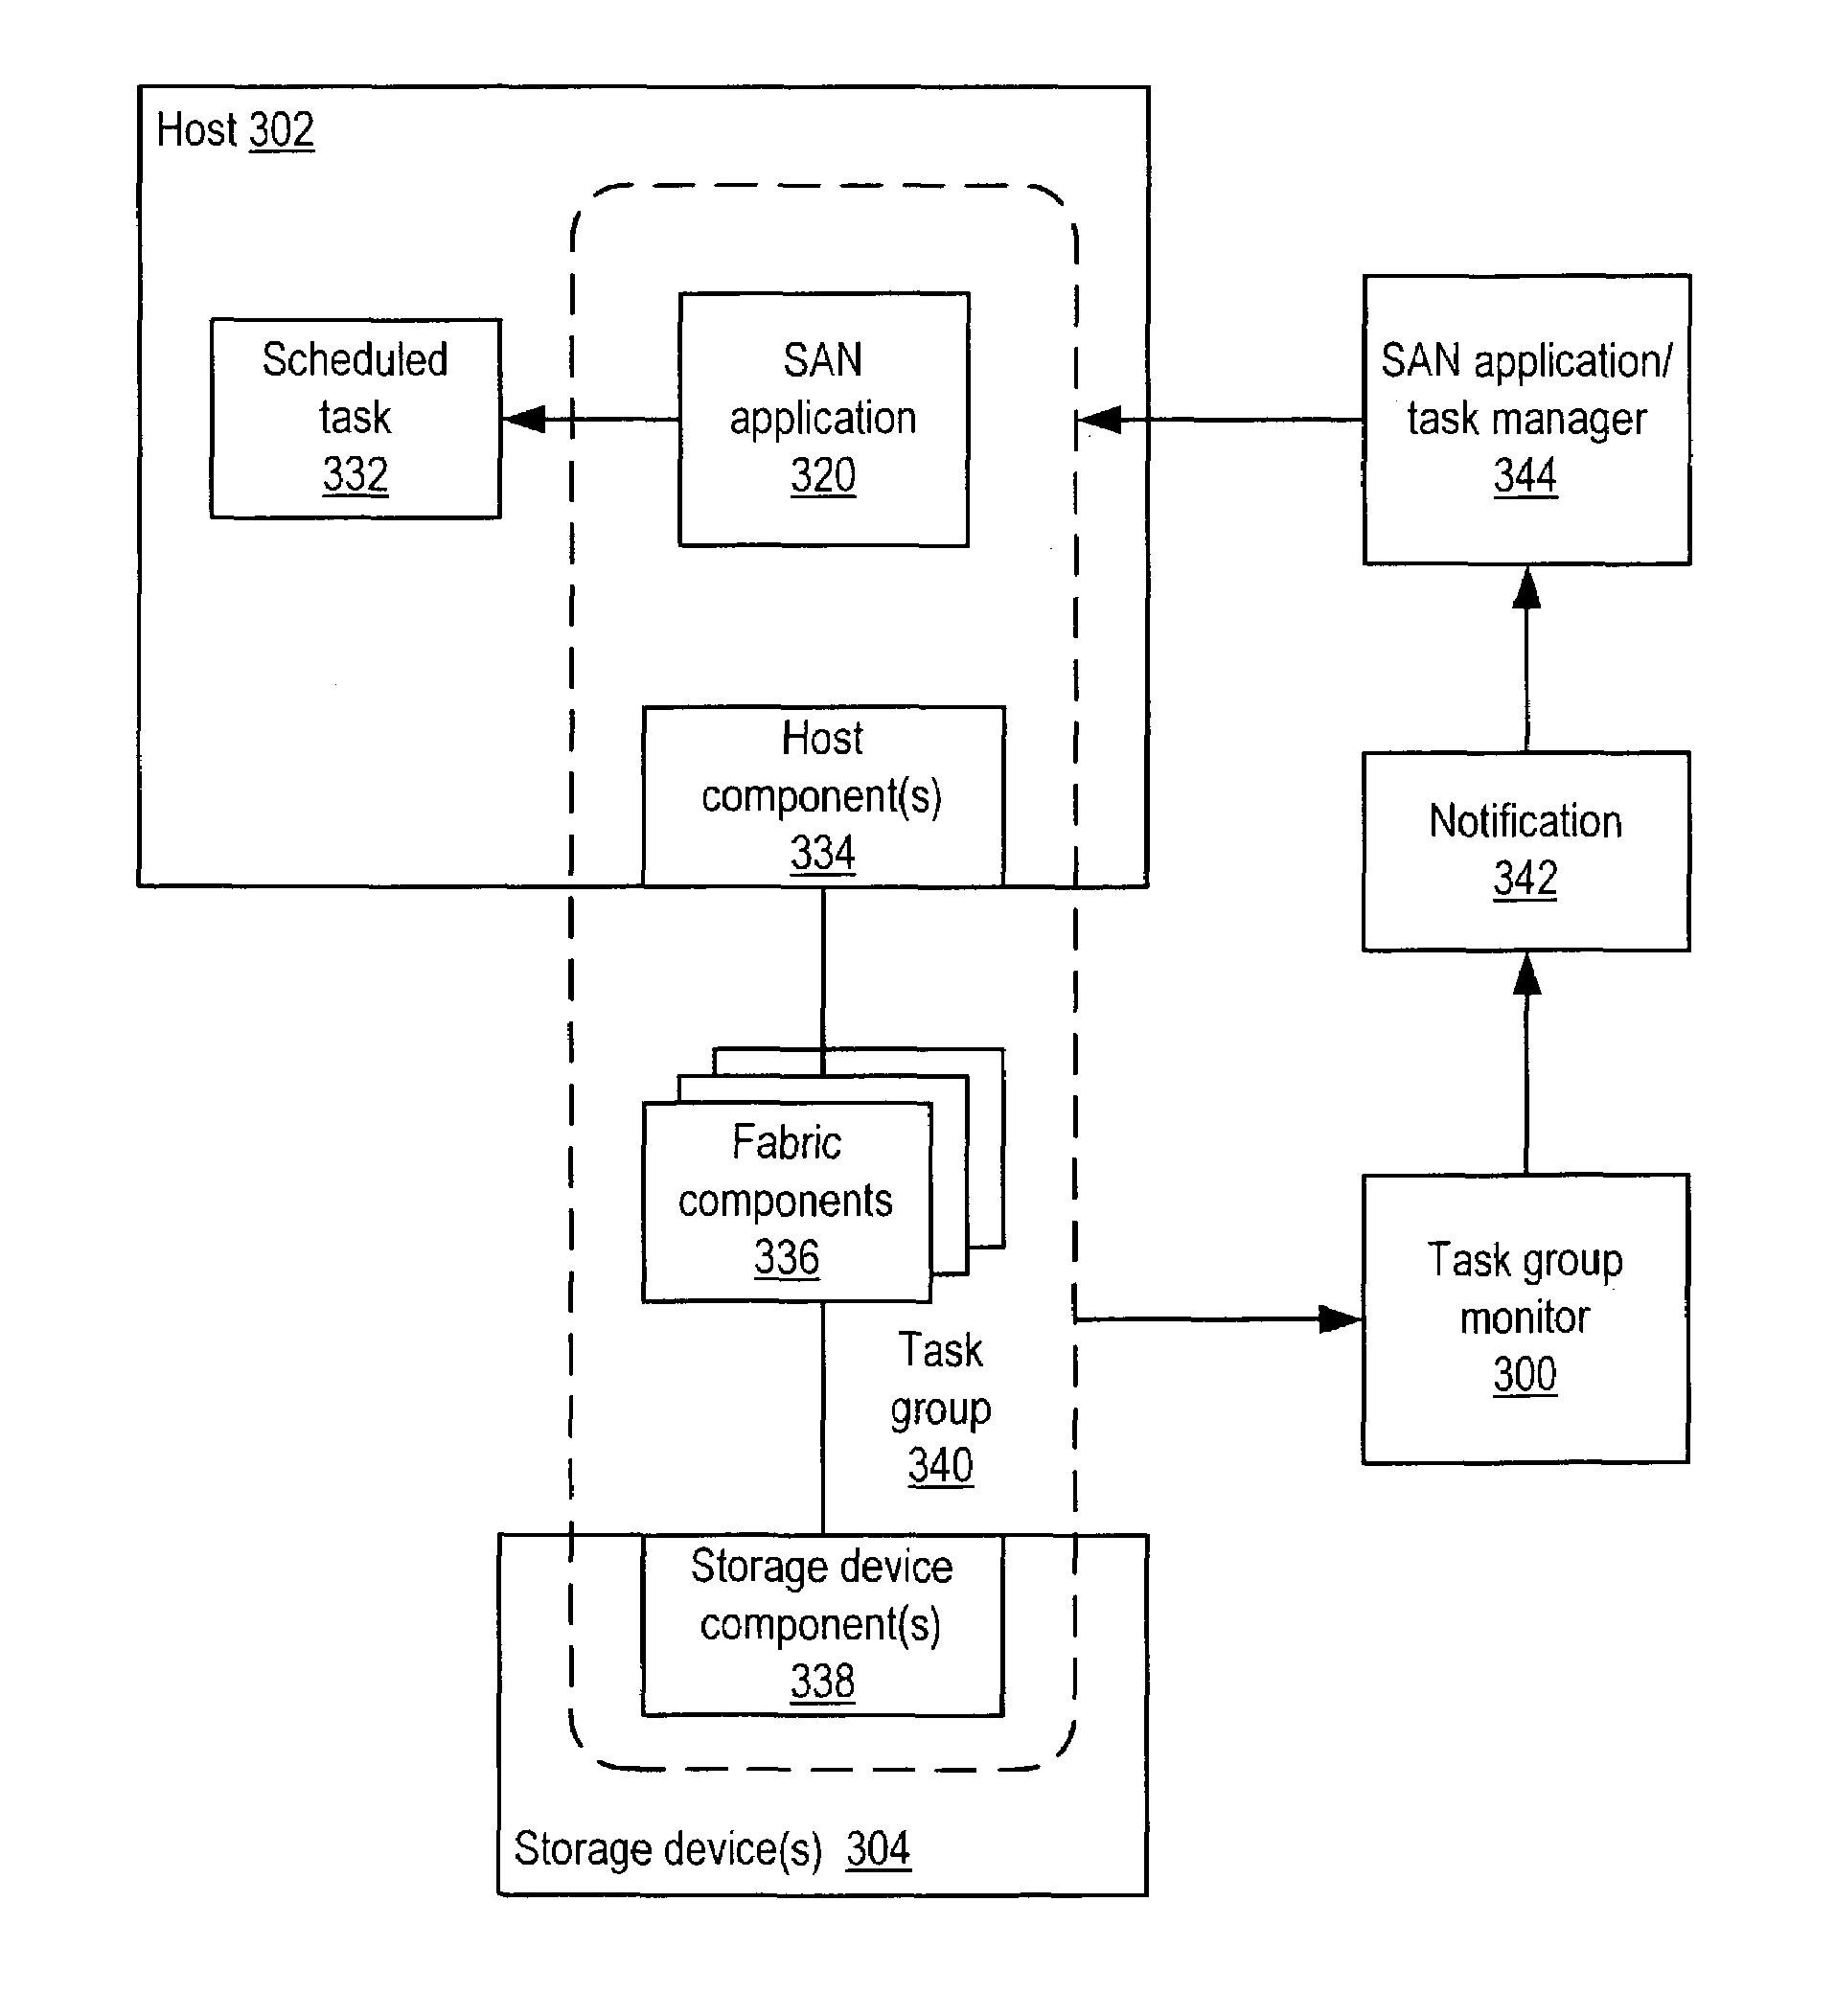 Service-level monitoring for storage applications